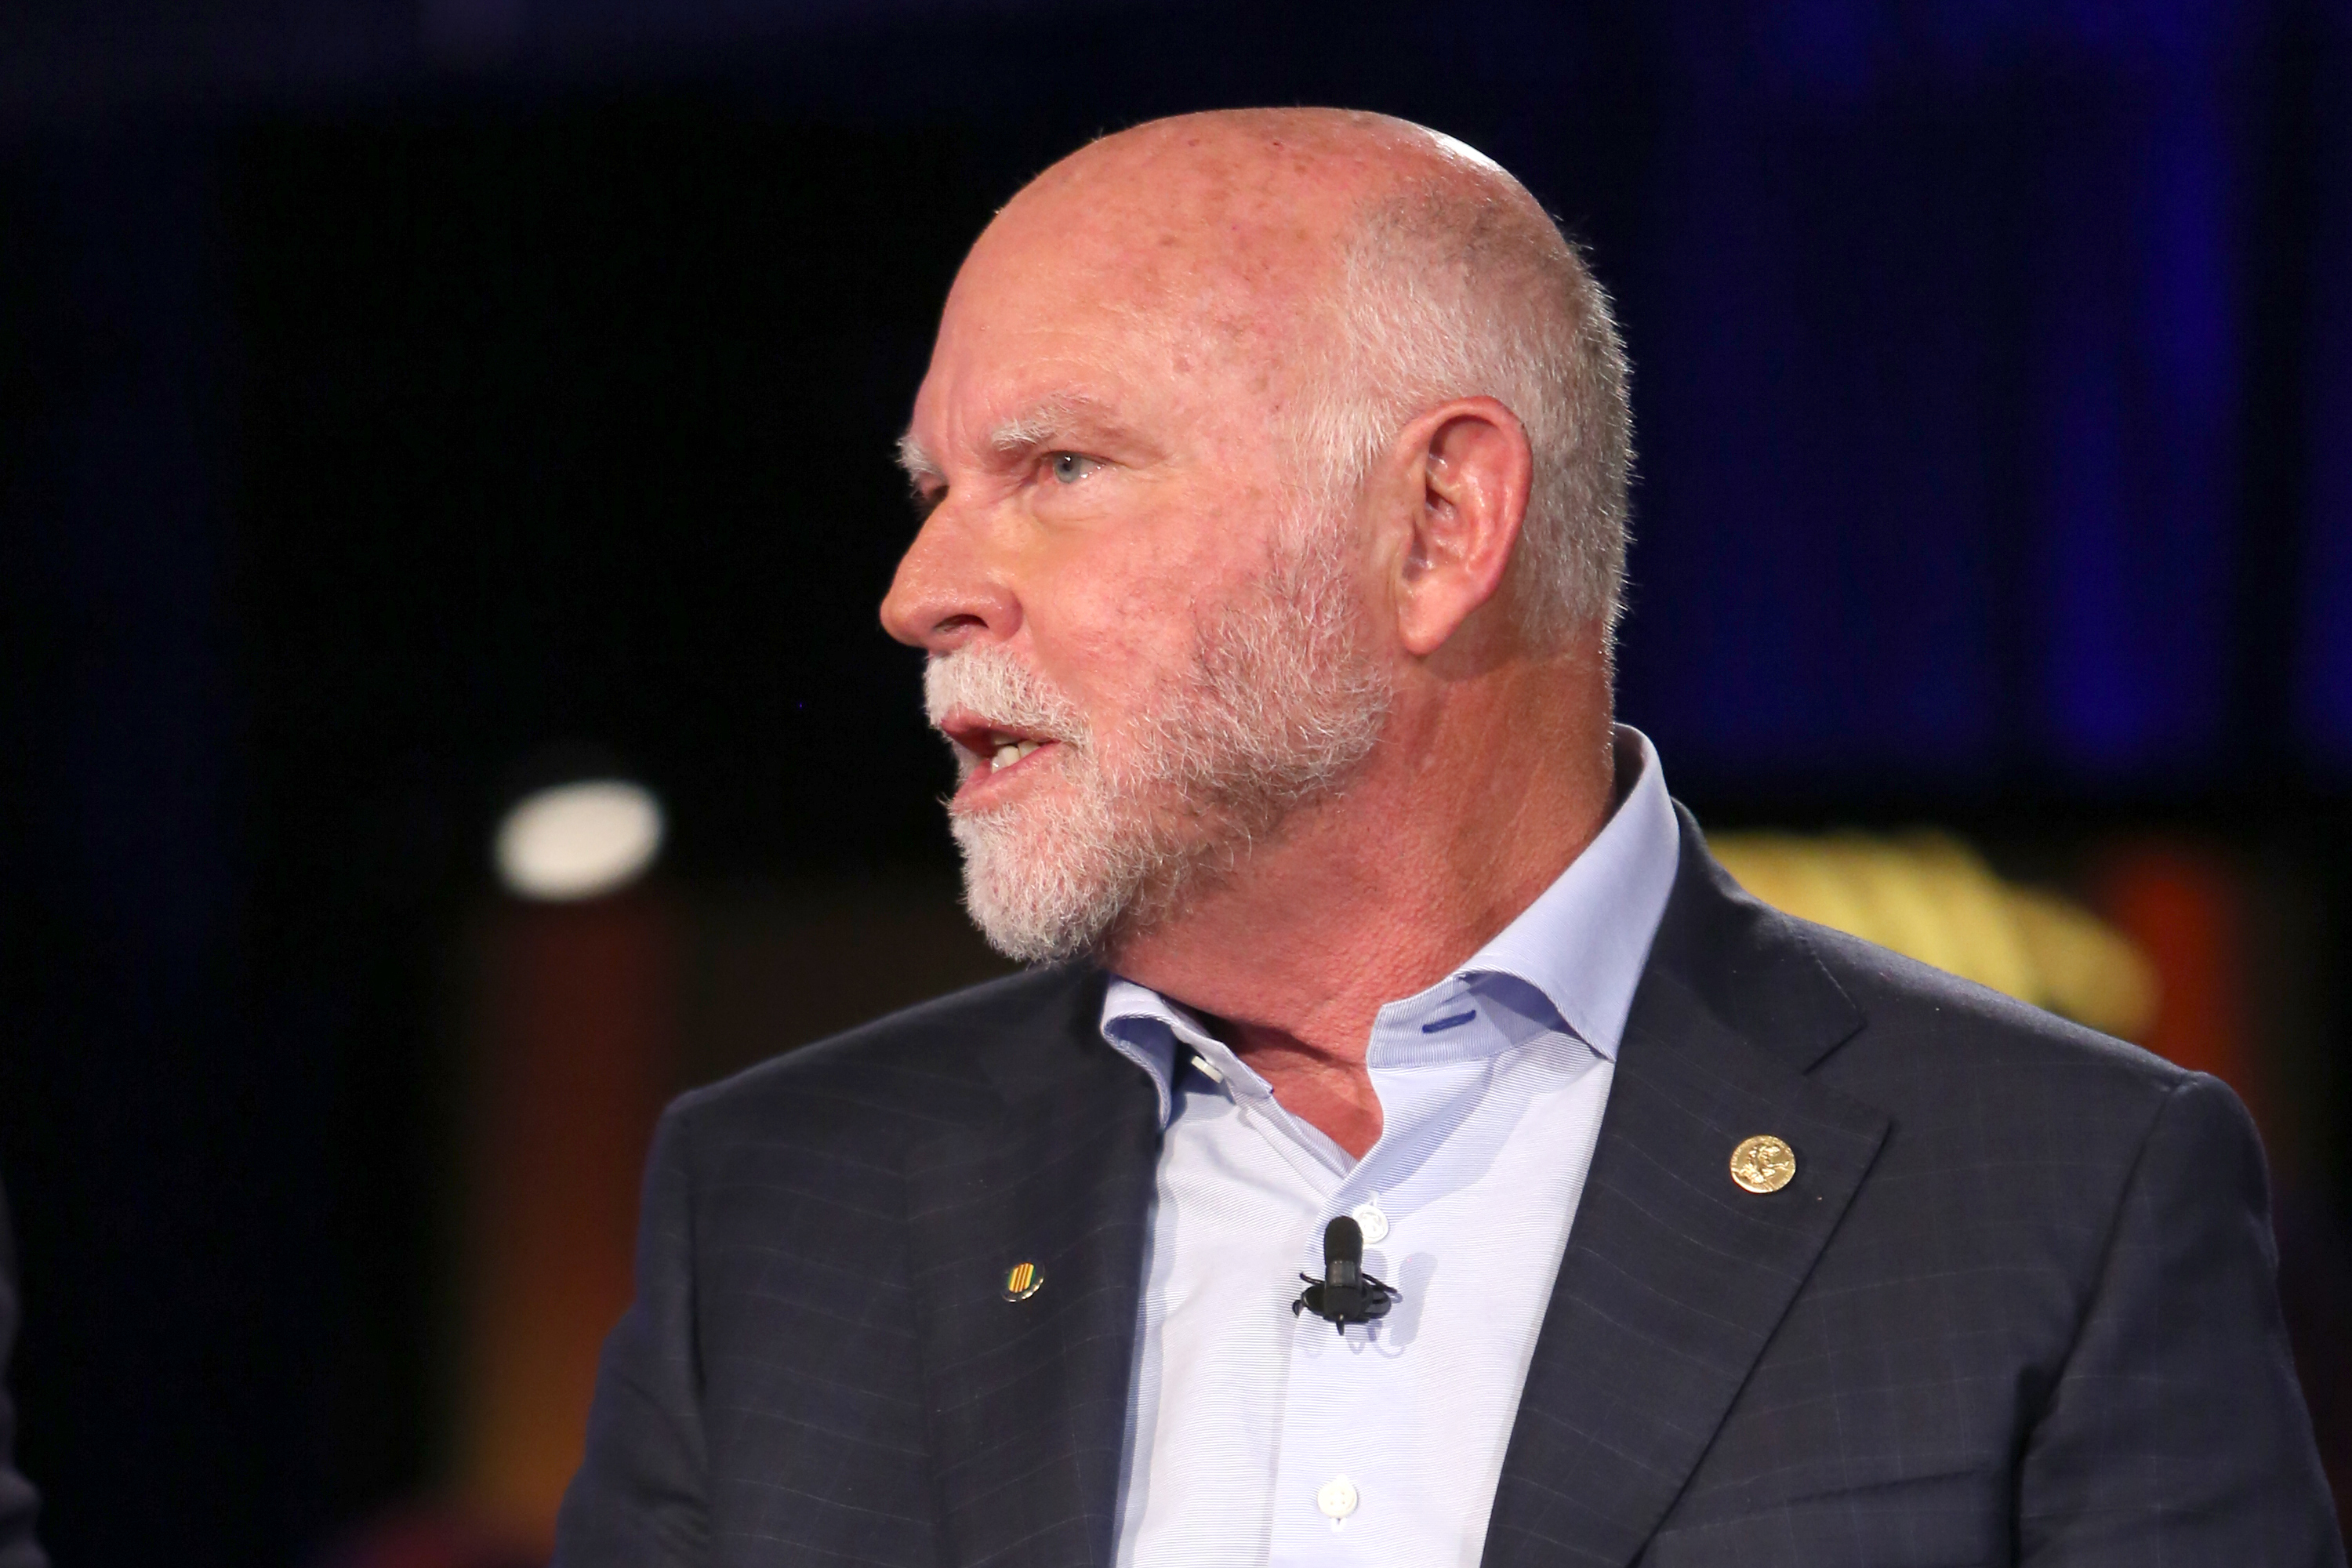 Craig Venter discusses human genome mapping and its impact on healthcare, in New York City on Sept. 29, 2015. (Adam Jeffery—NBCU/Getty Images)